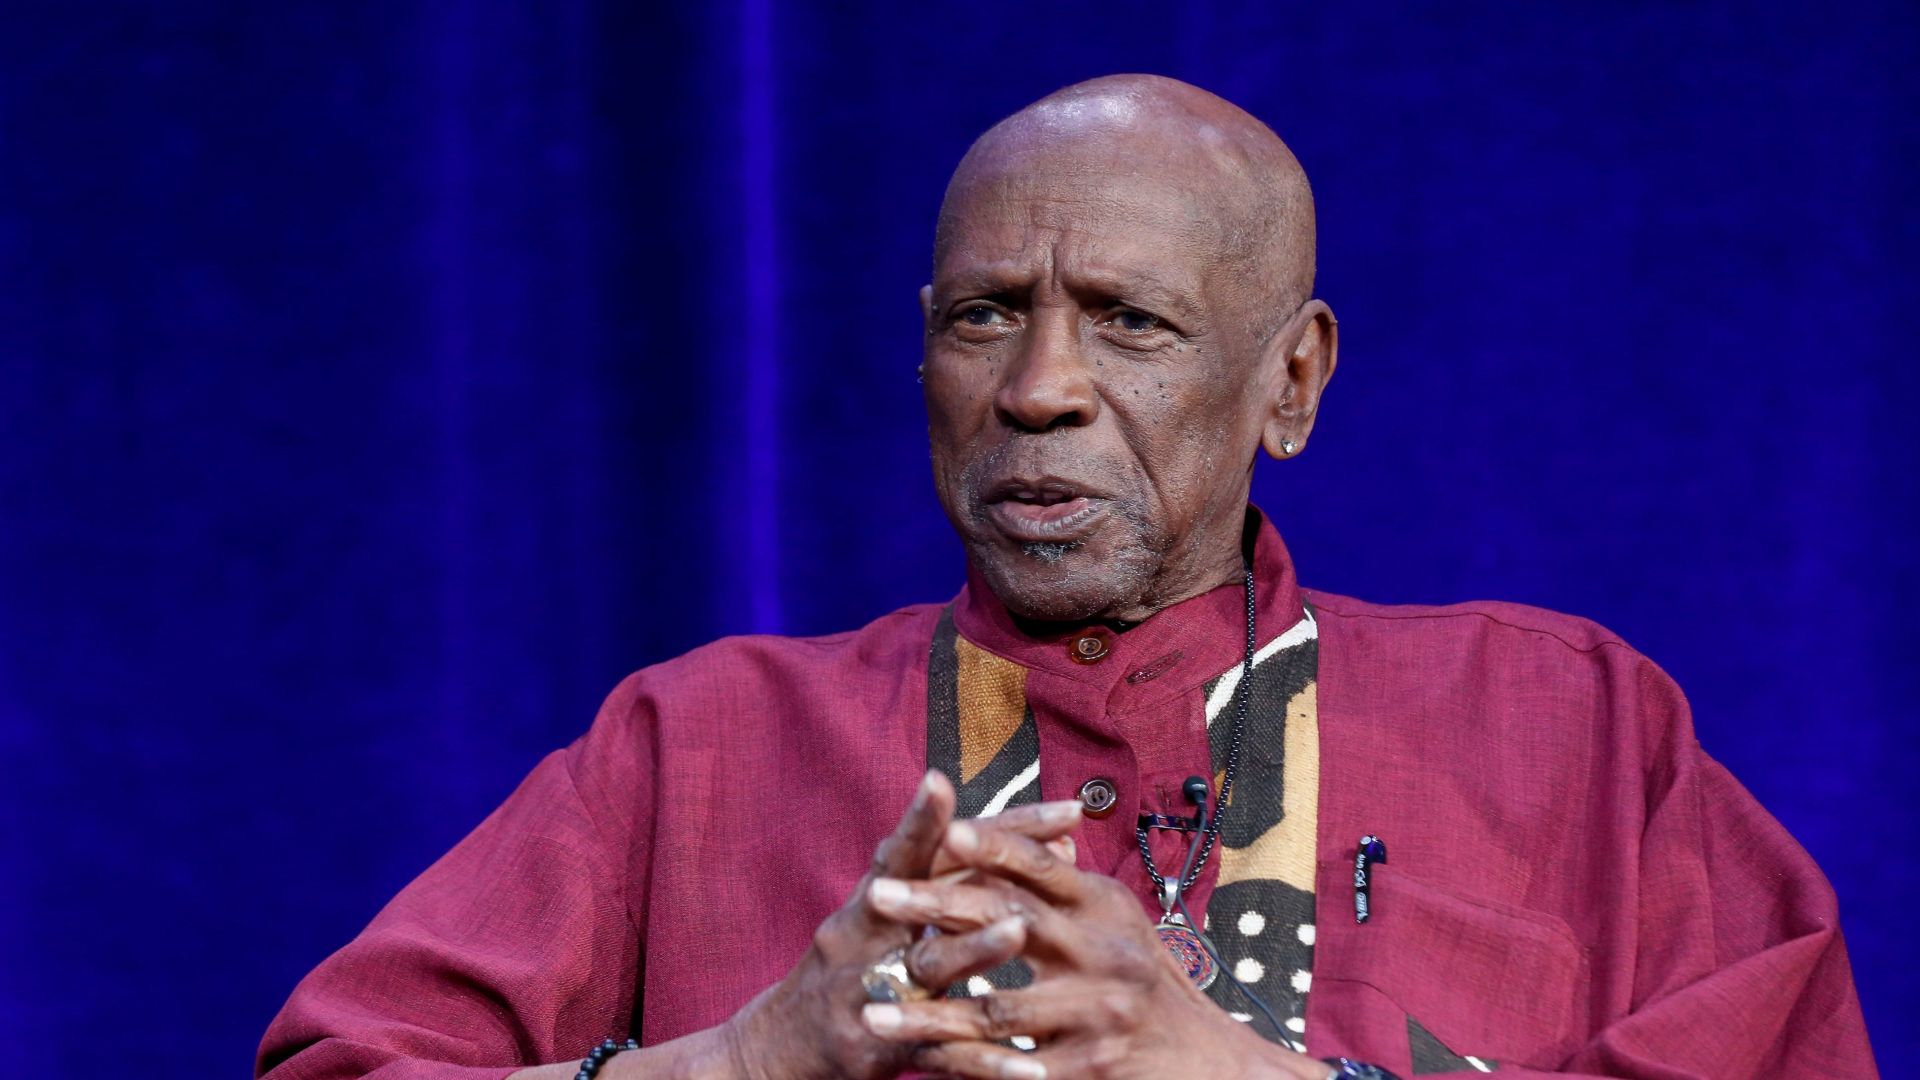 Louis Gossett Jr. Reflects on Family, Fame and Life at 84